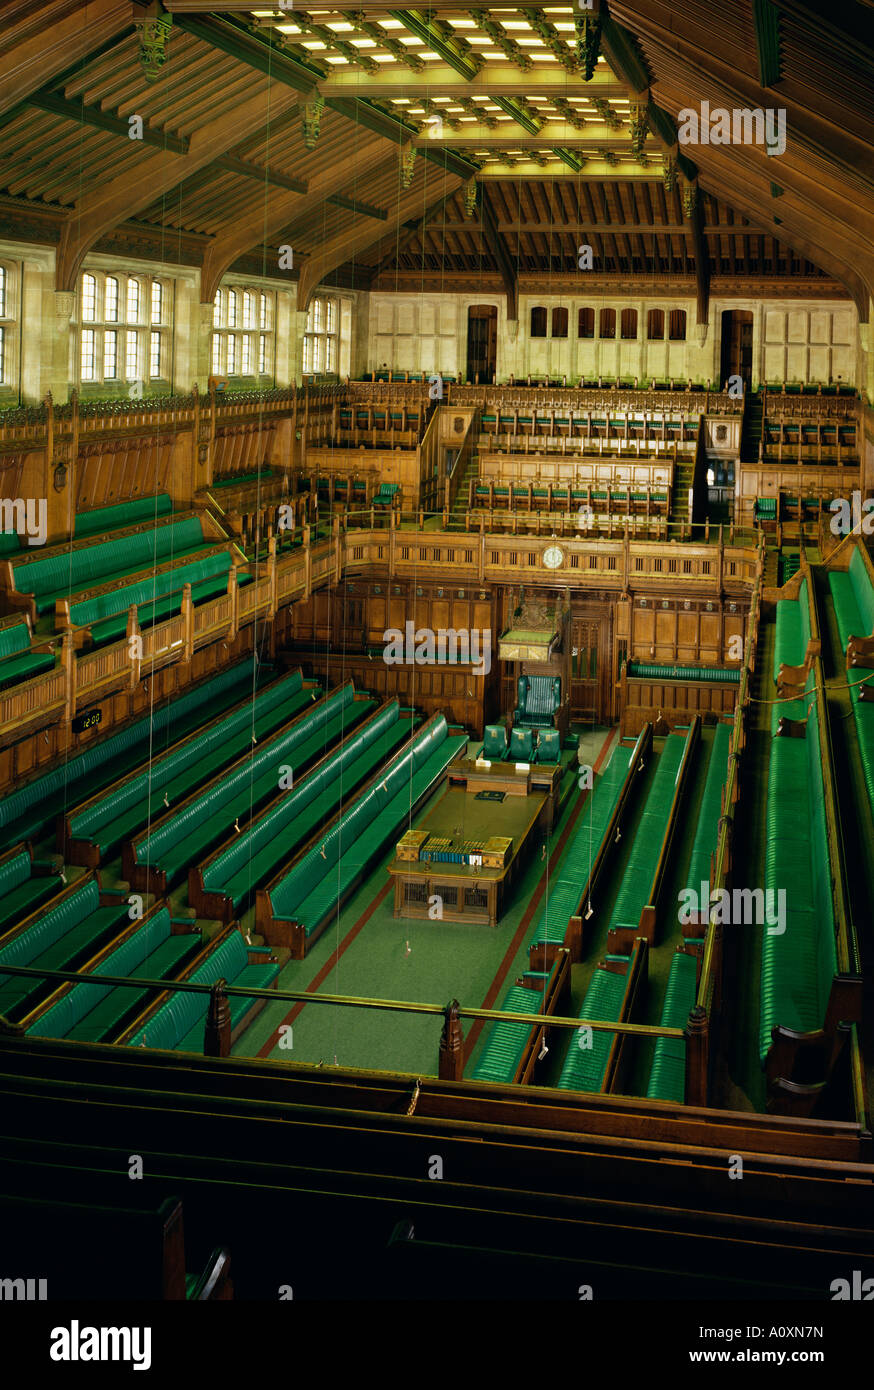 Interior of the Commons chamber Houses of Parliament Westminster London England United Kingdom Europe Stock Photo